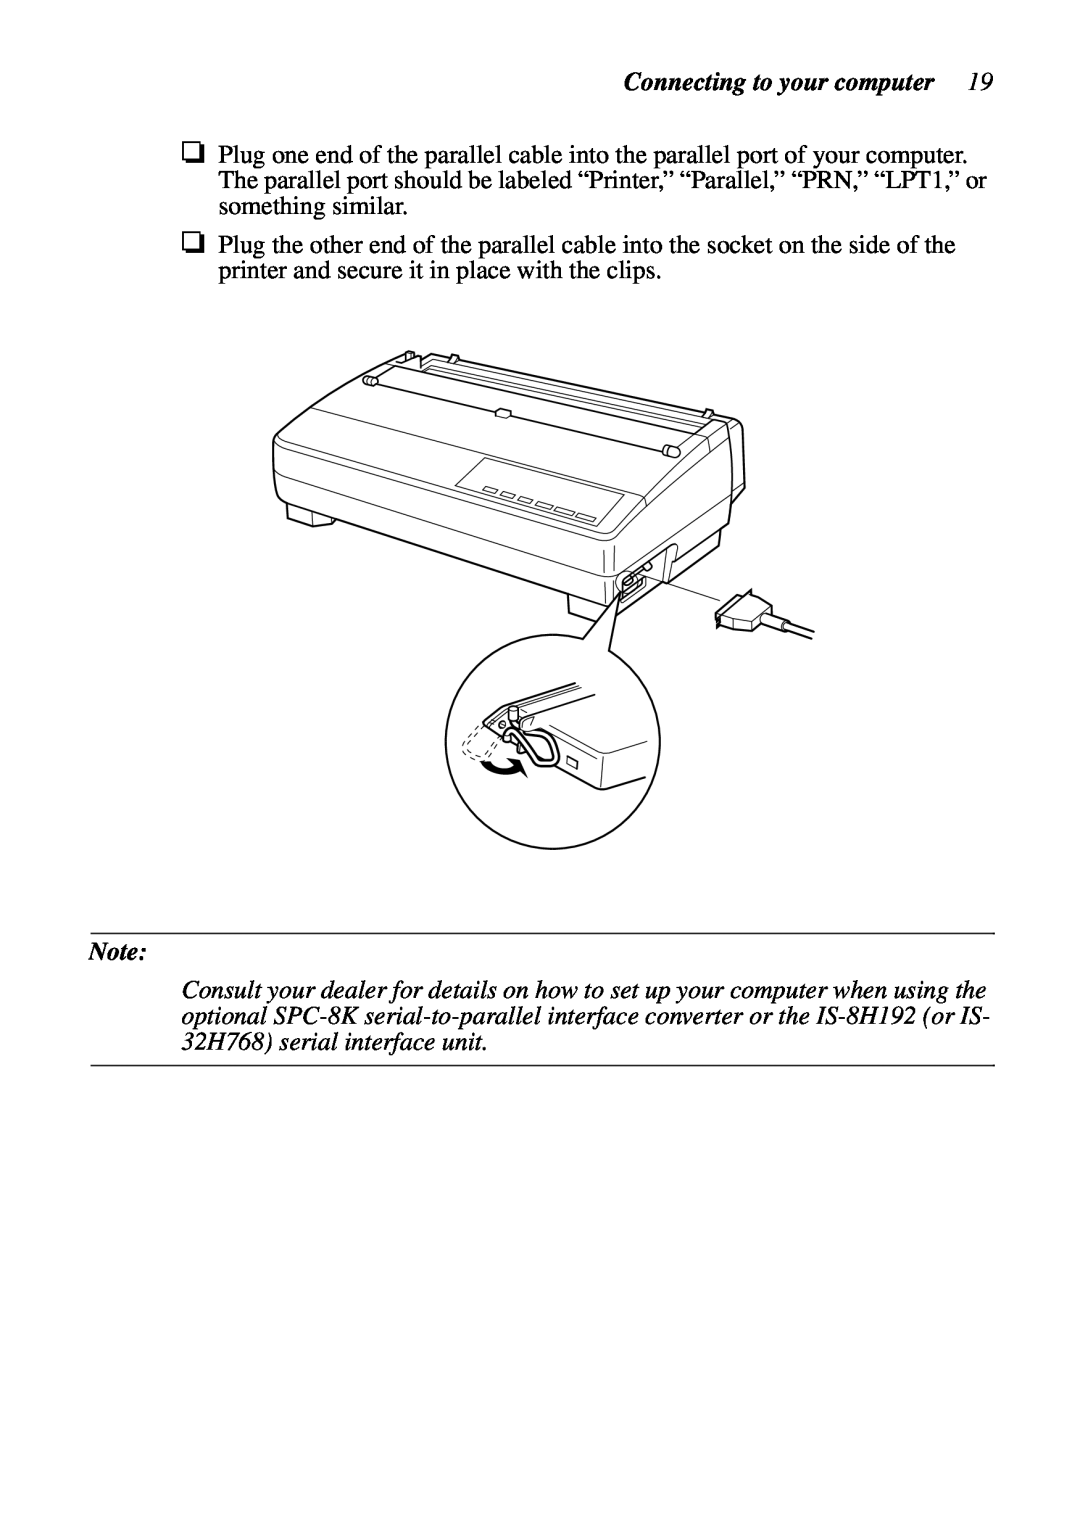 Star Micronics HA15 80825072, LC-1521, LC-1511, DOT MATRIX PRINTERS user manual Connecting to your computer 